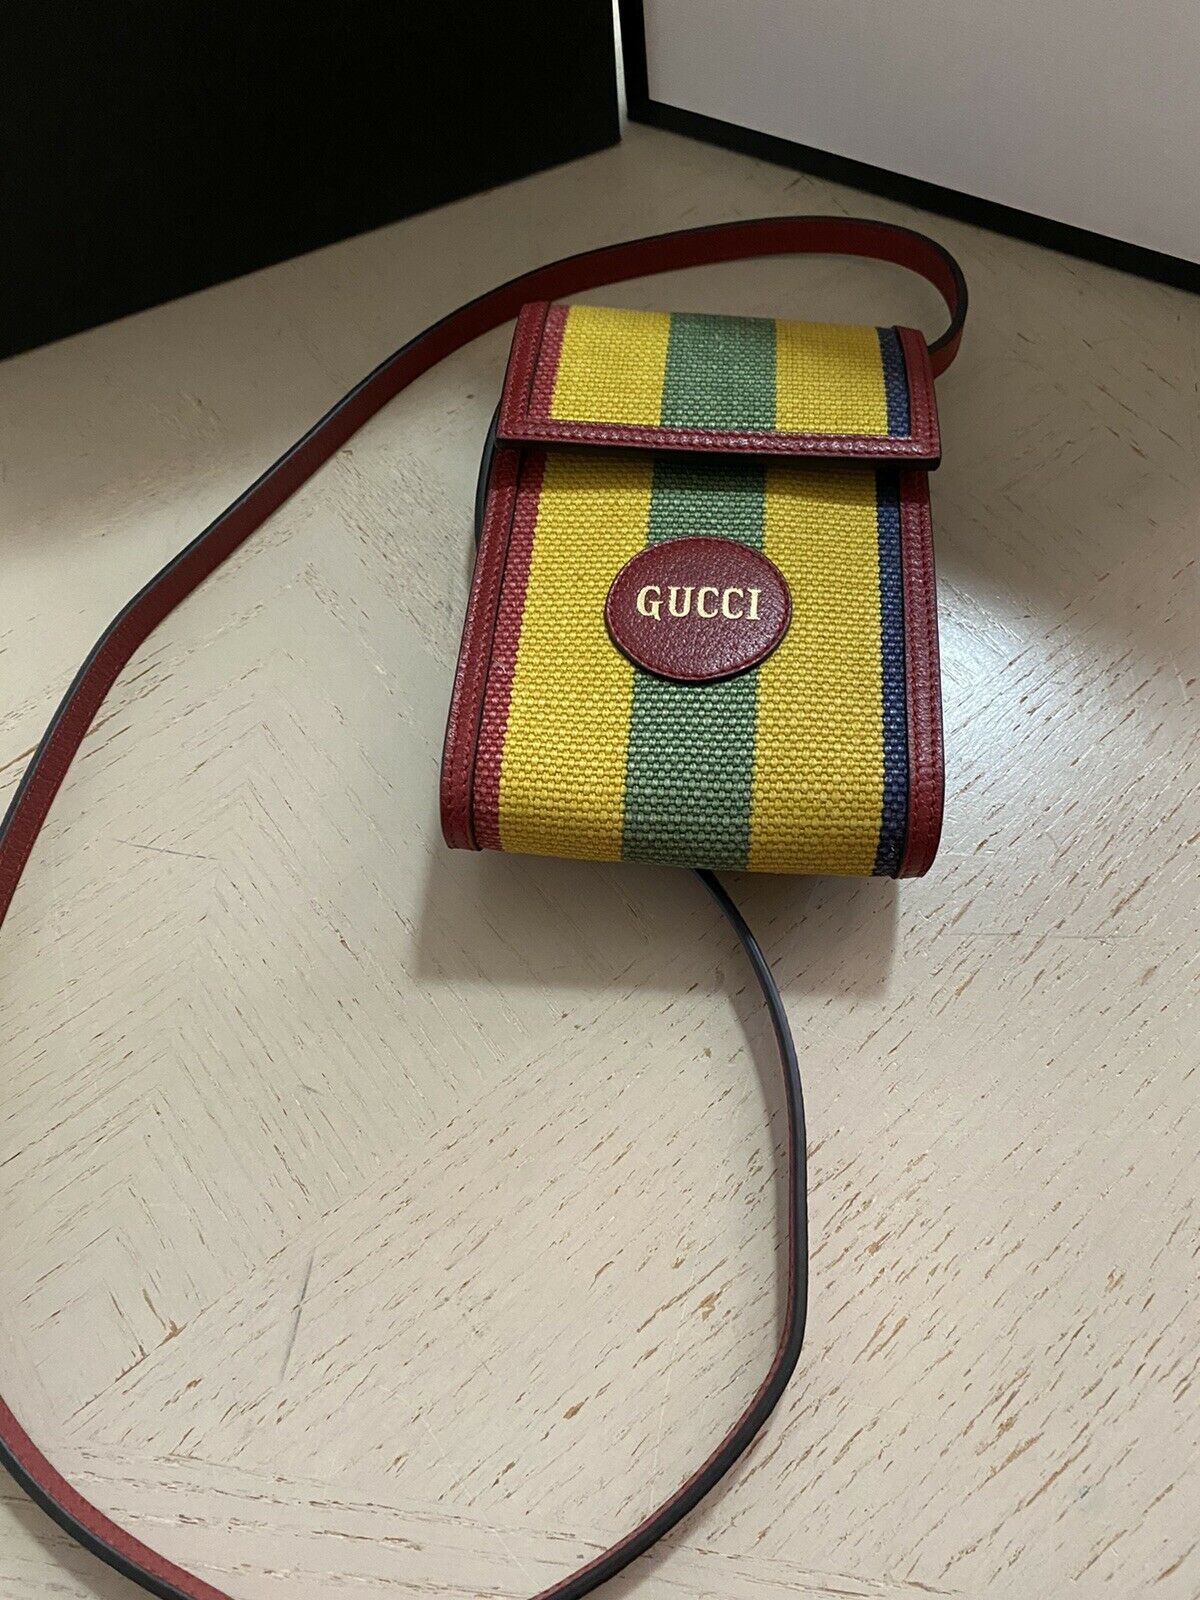 New Gucci Canvas/Leather Phone Case Crossbody Bag Shoulder Bag Red/Yellow/Green